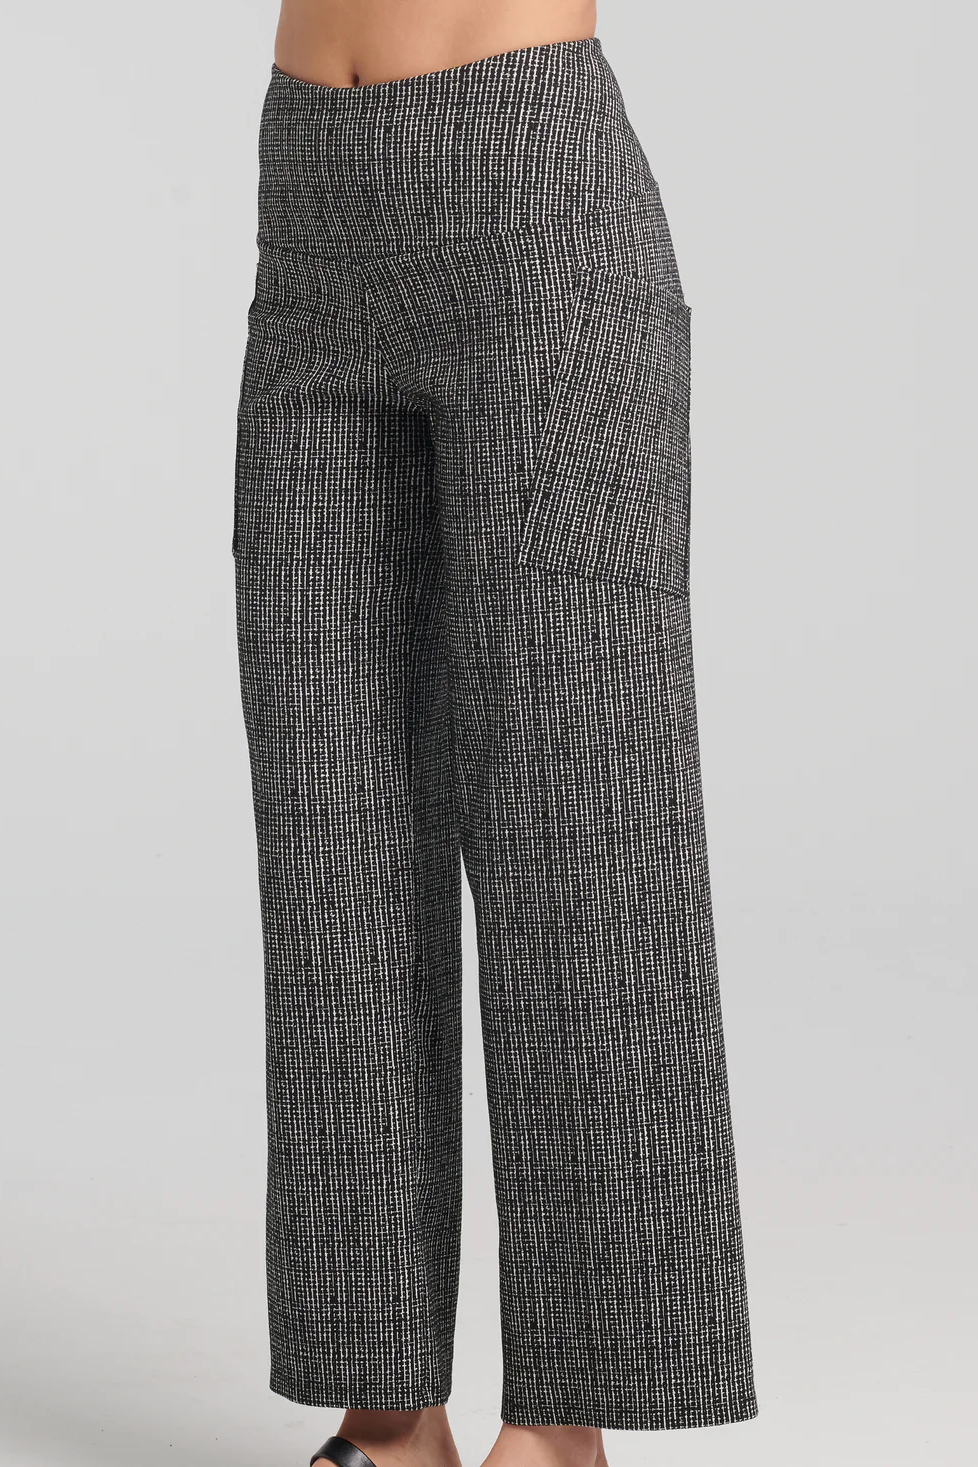 Bakairi Pants by Kollontai, Black, subtle cross-hatch pattern, wide pull-on waistband, stretchy fabric, wide legs, slanted patch pockets, sizes XS to XXL, made in Montreal 